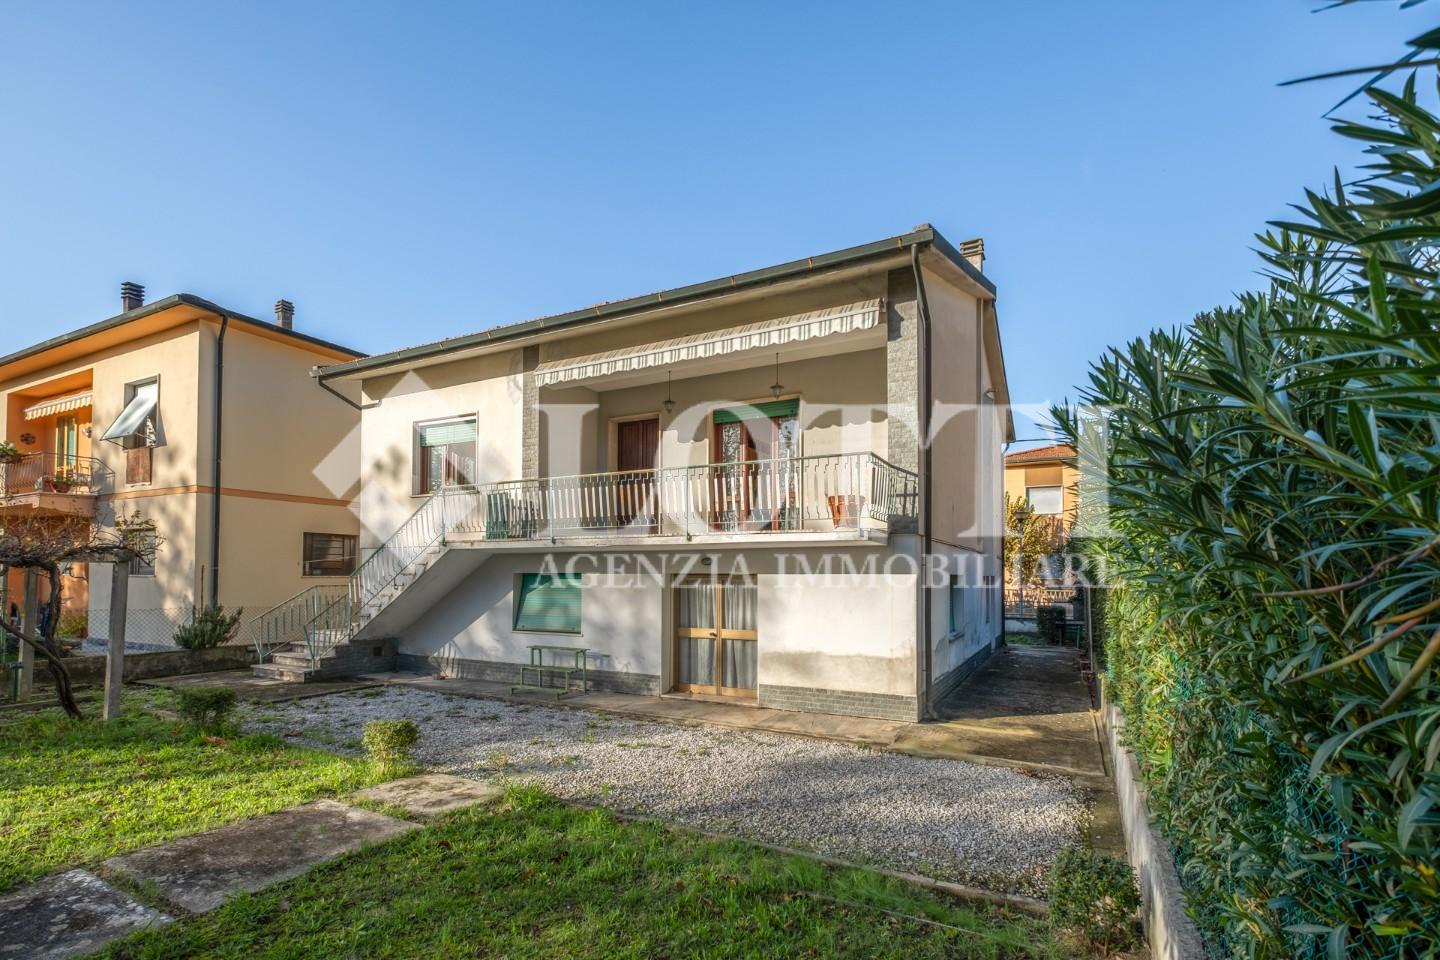 Single-family house for sale in Calcinaia (PI)